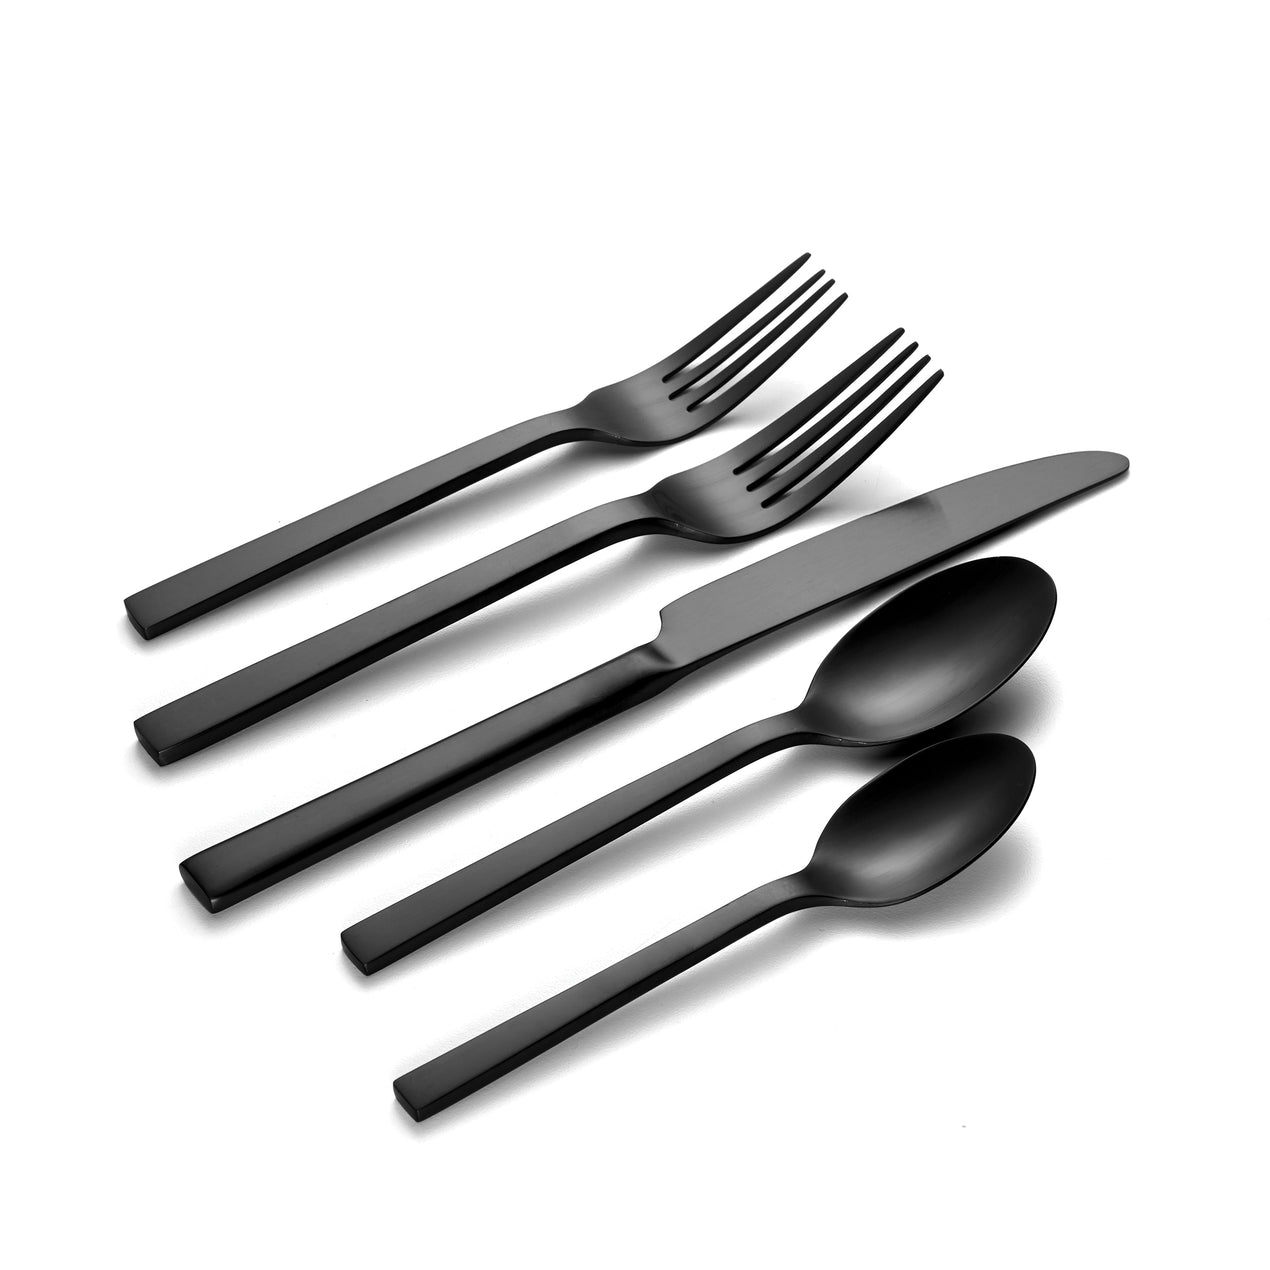 Black Silverware Set 20 Pieces, Stainless Steel Flatware for 4